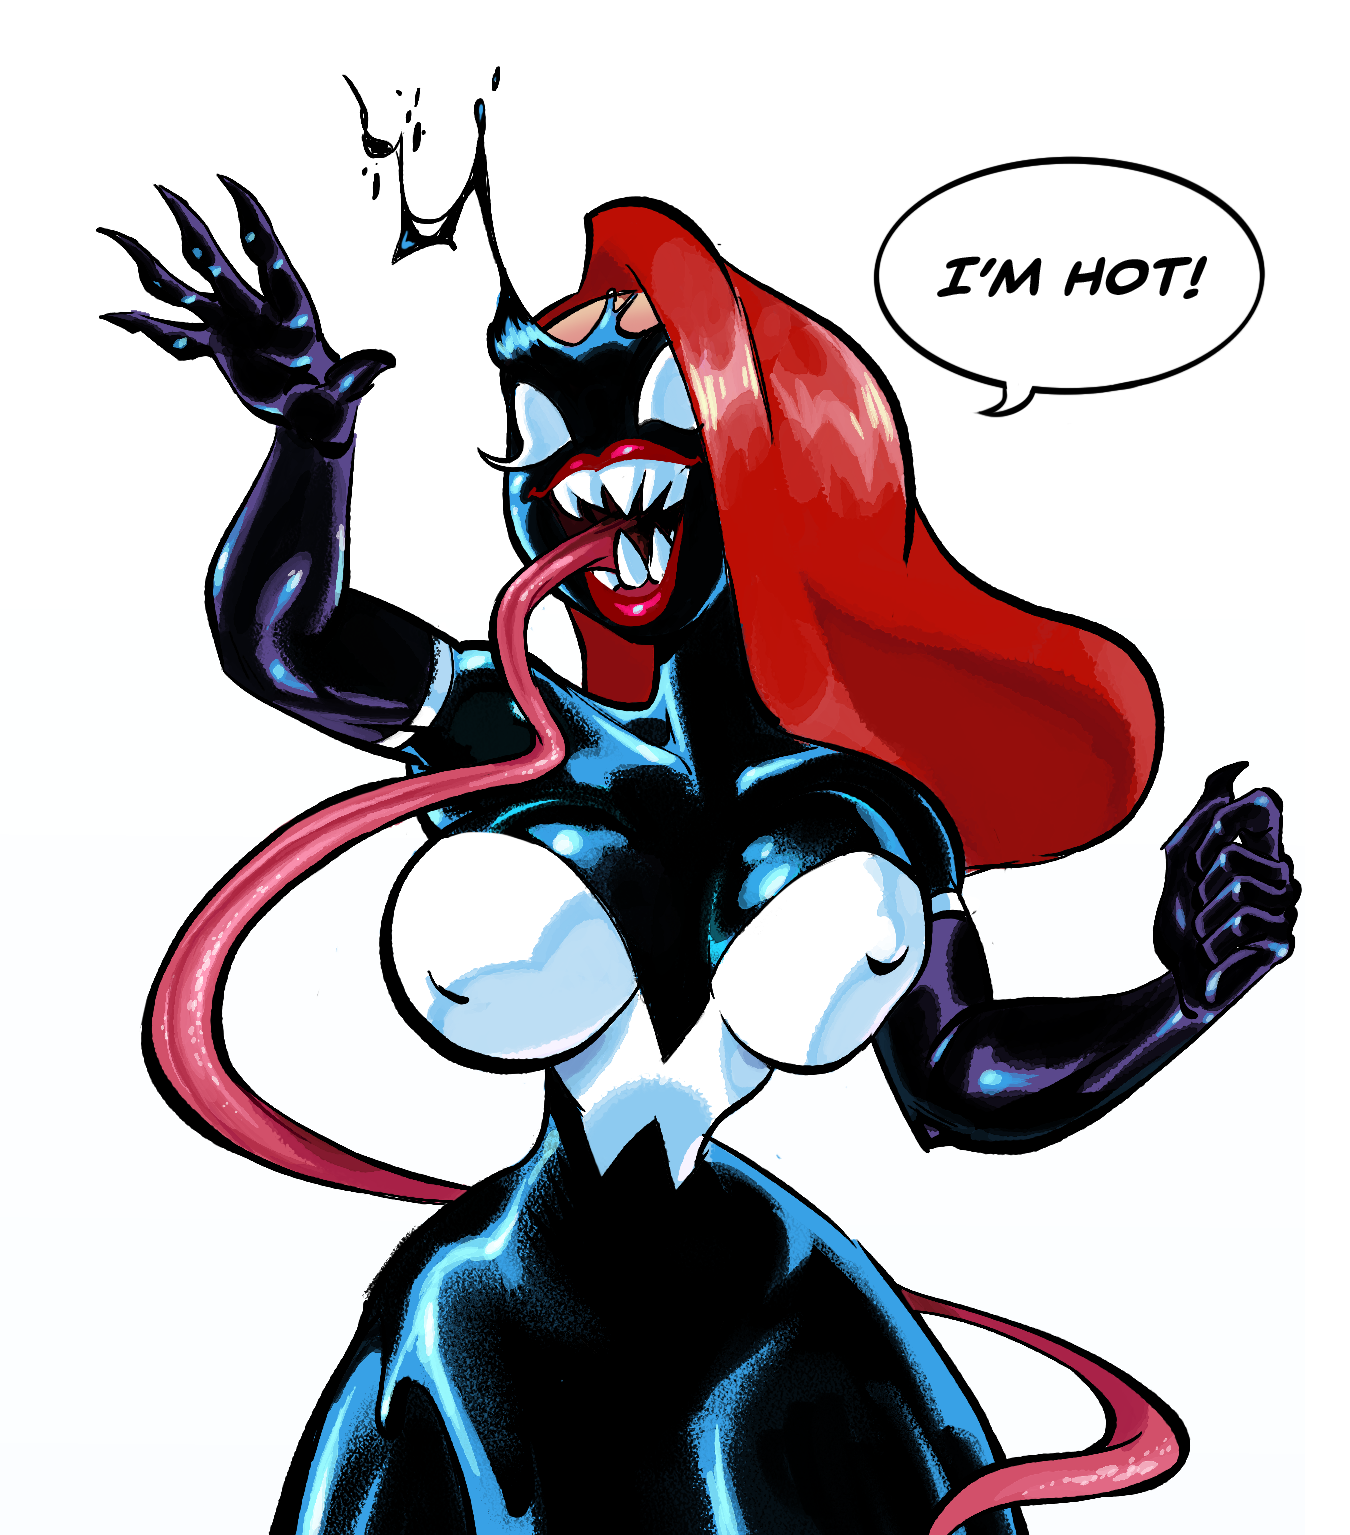 Requesting venomiezed Jessica Rabbit checking herself out in a mirror. 